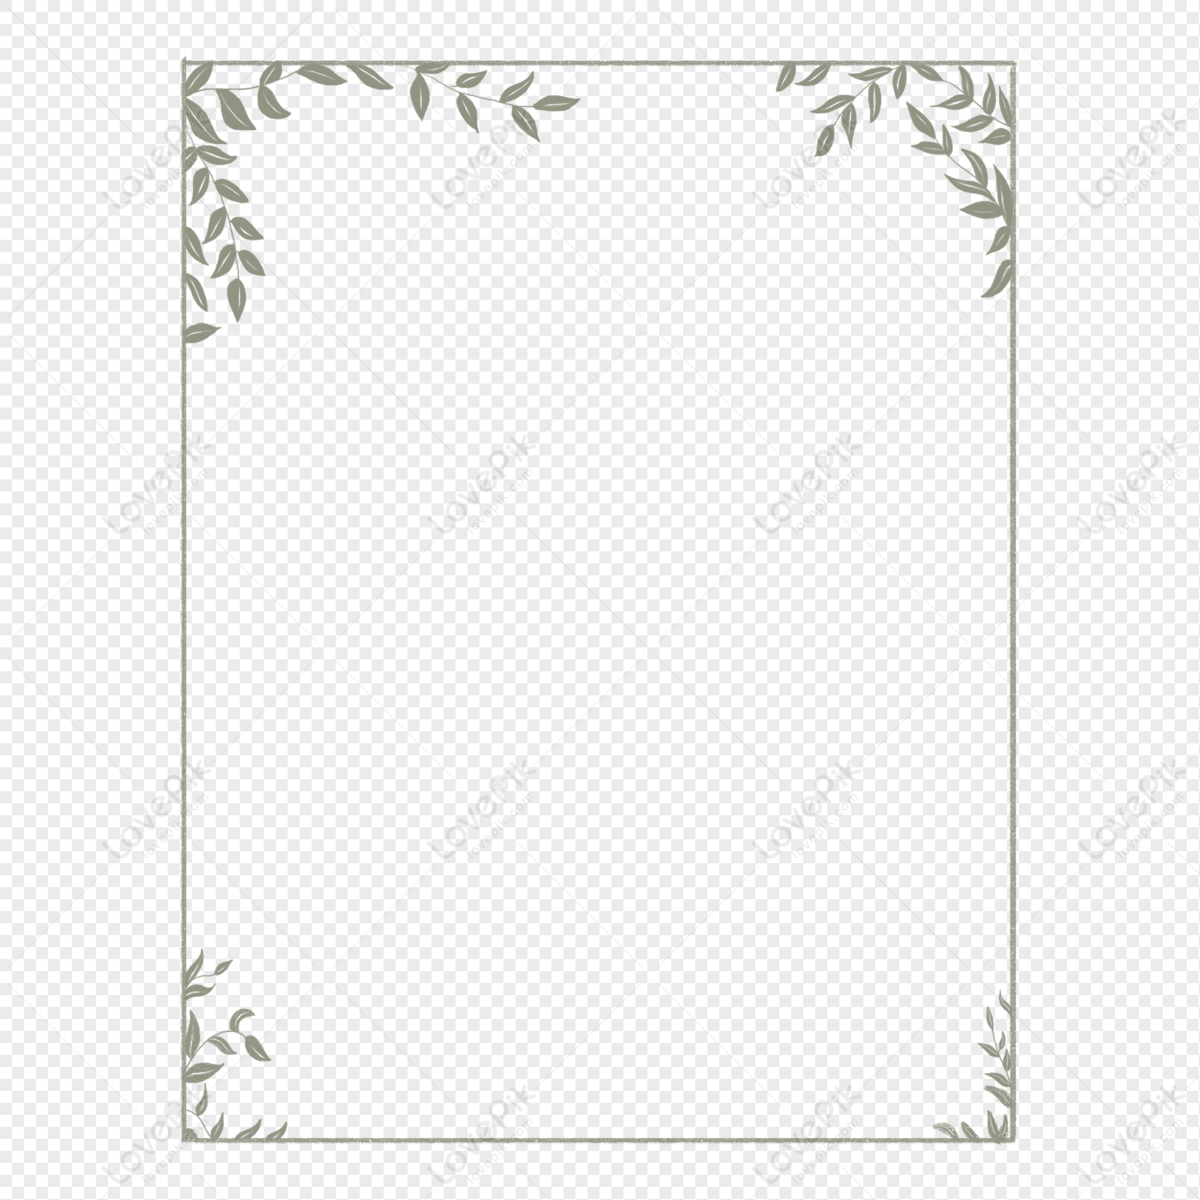 Hand drawn leaves rectangle border, rectangle frame, rectangle border, hands leaves png transparent image